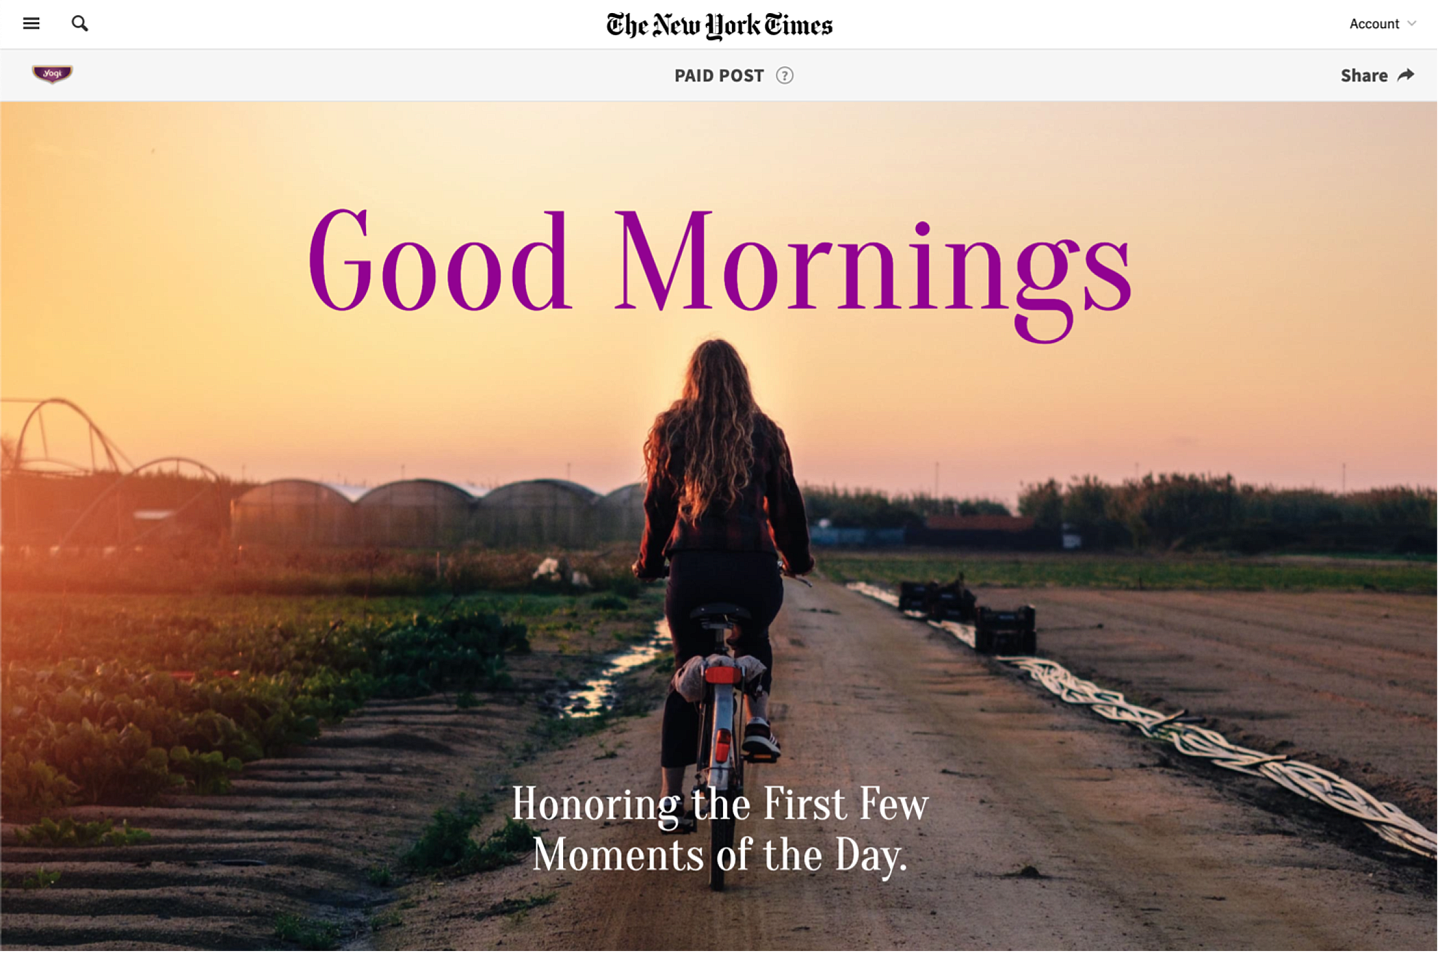 screenshot of a web site showing a person on a bike under the headline "Good Mornings"